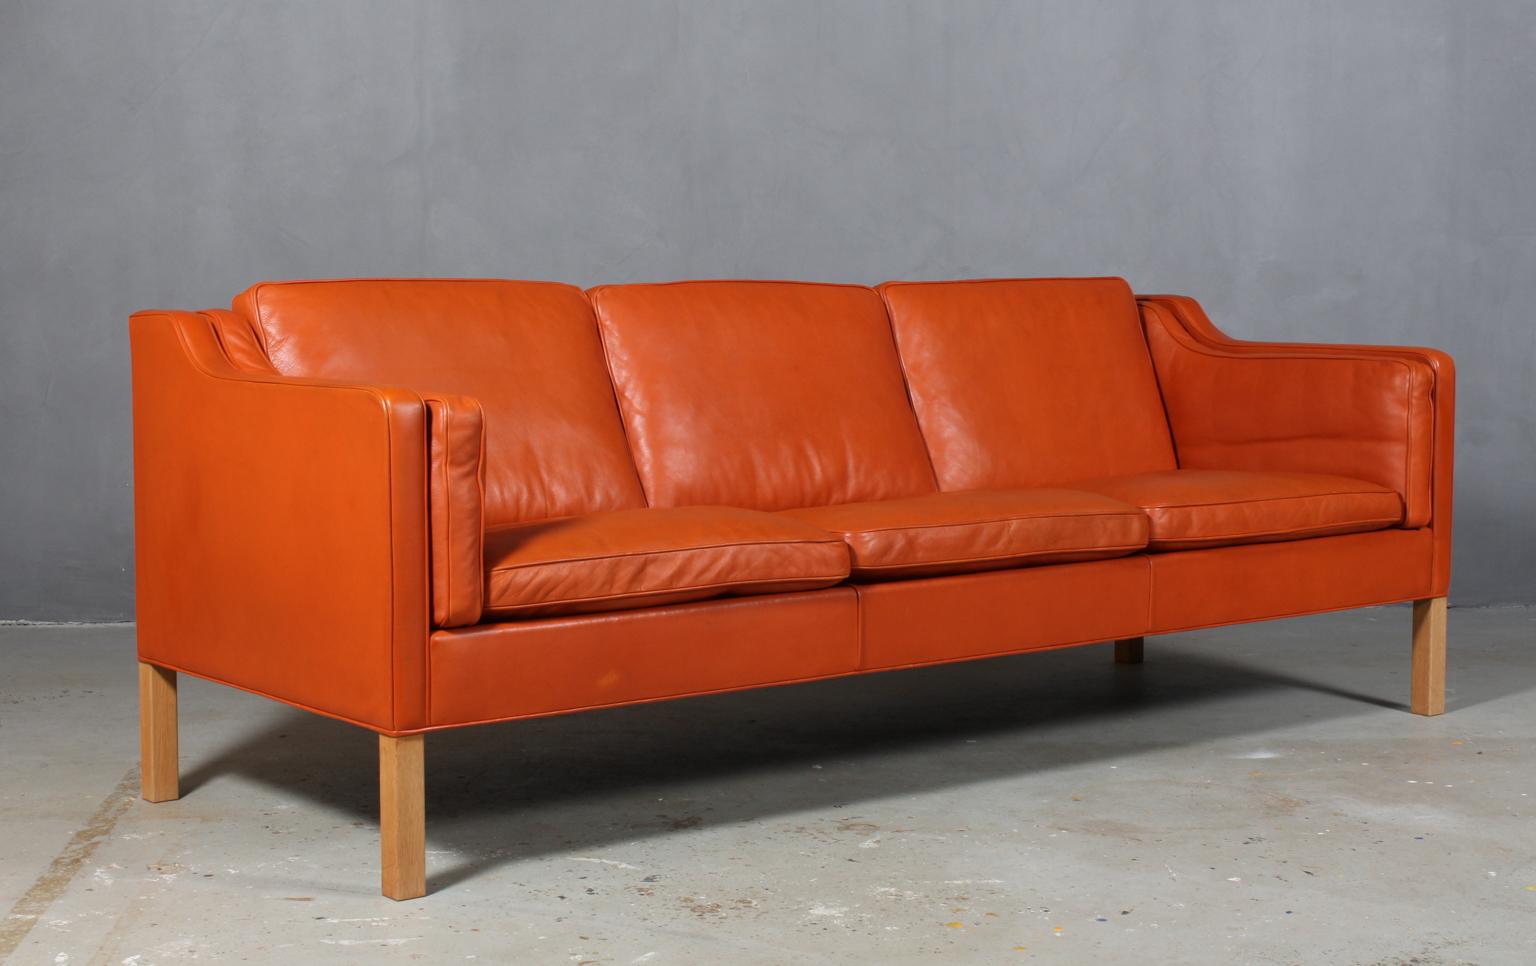 Børge Mogensen three-seat sofa with original cognac leather upholstery.

Legs of oak.

Model 2213, made by Fredericia Furniture.